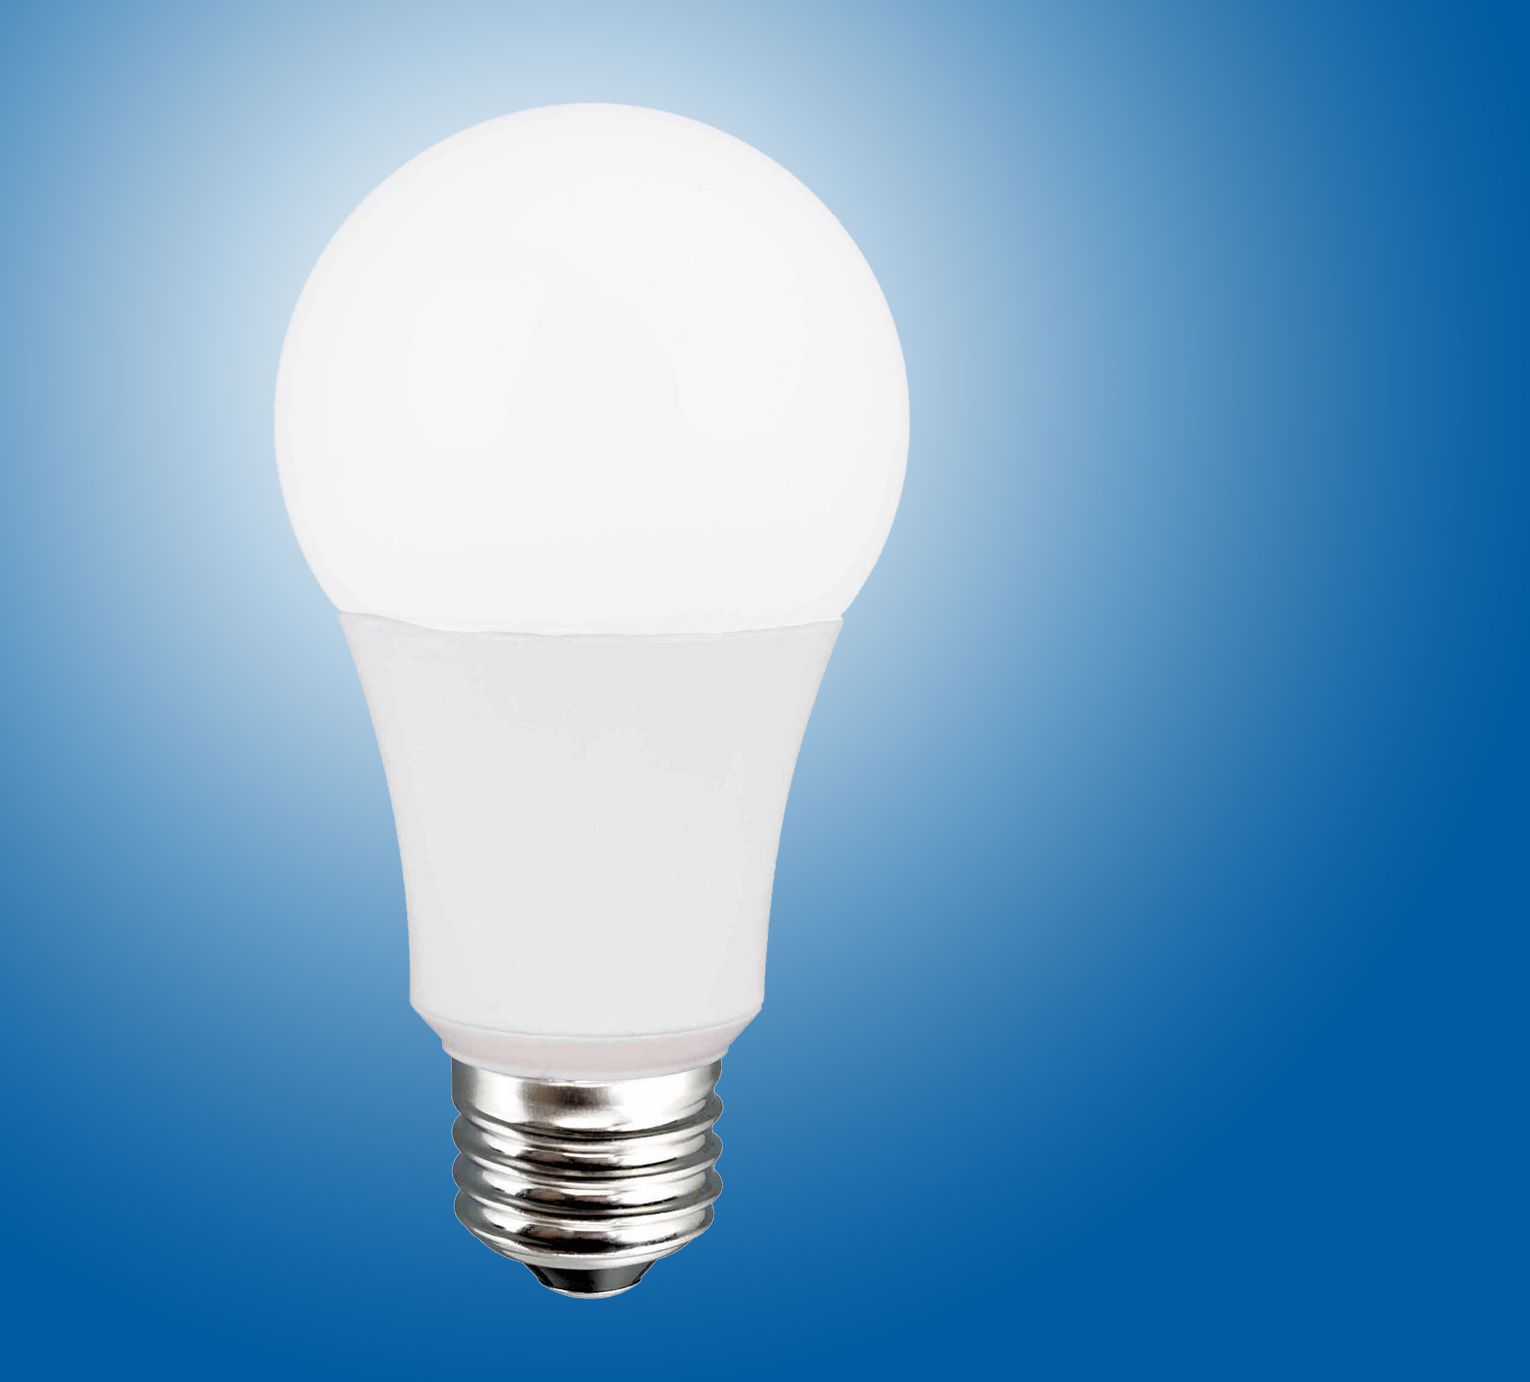 Air King Ventilation: Say Goodbye to Your Old Light Bulb LED Lighting